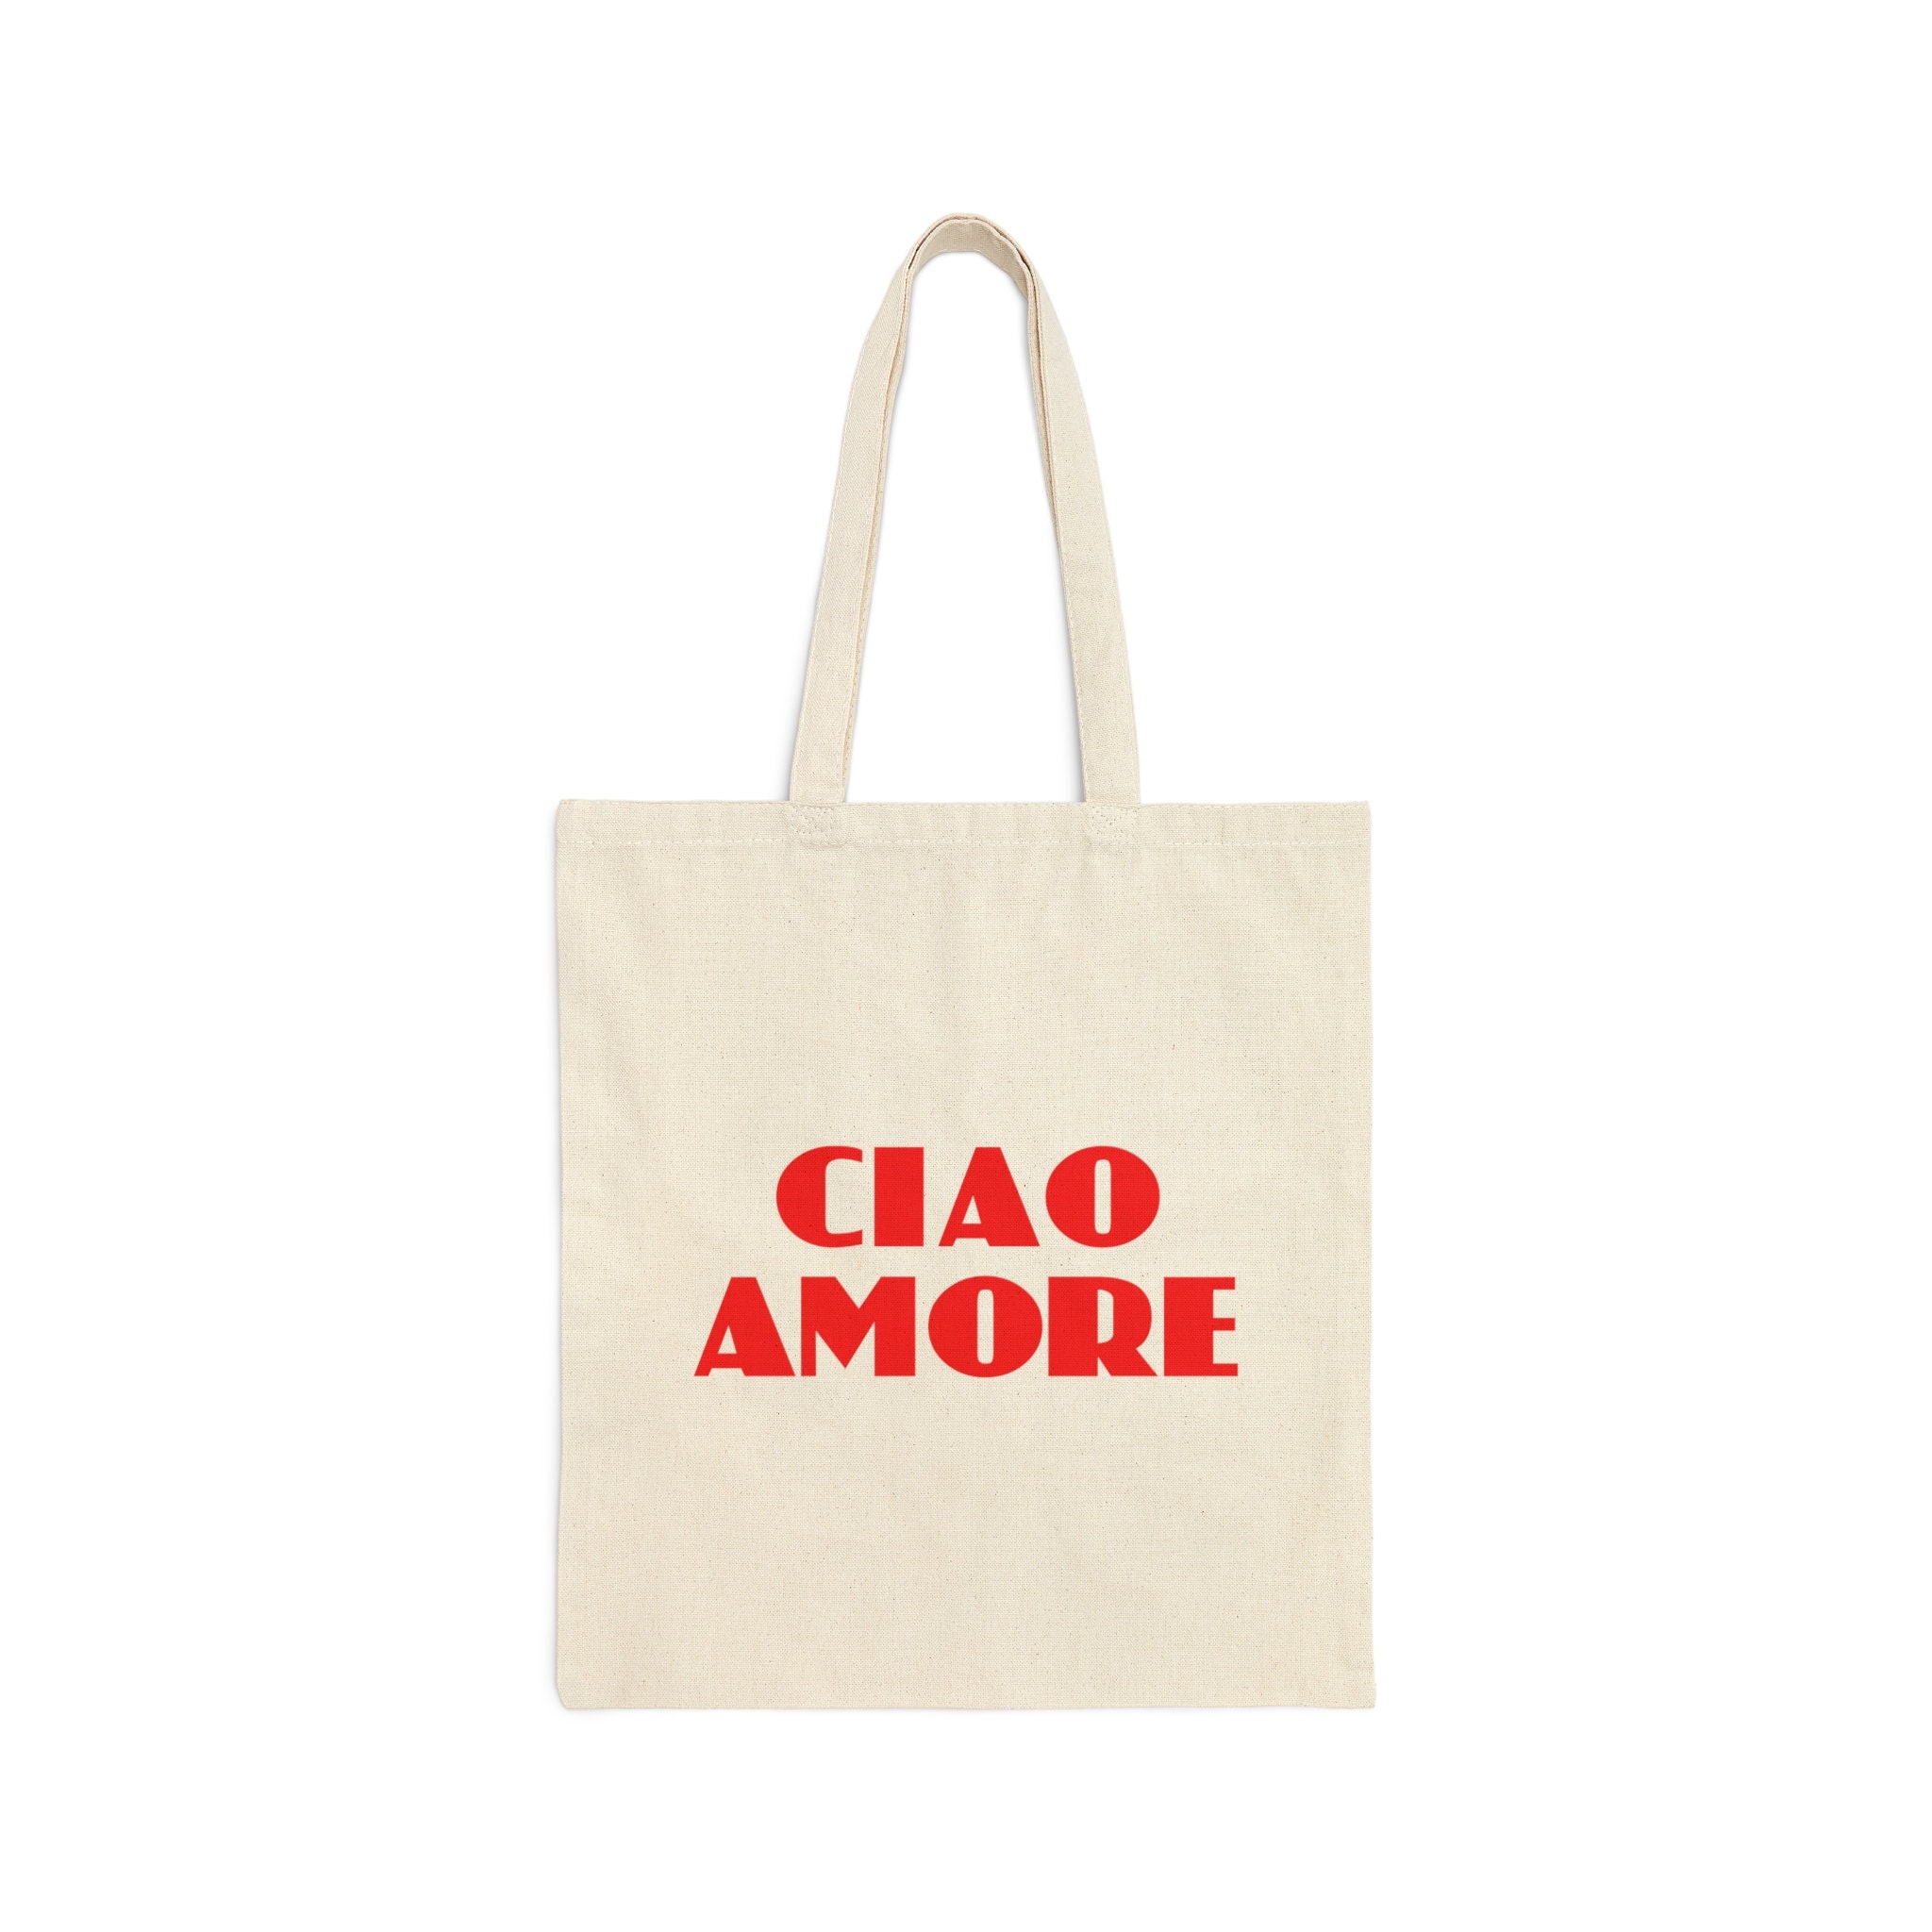 Buy Ciao Bella Tote Bag Green Online in India 